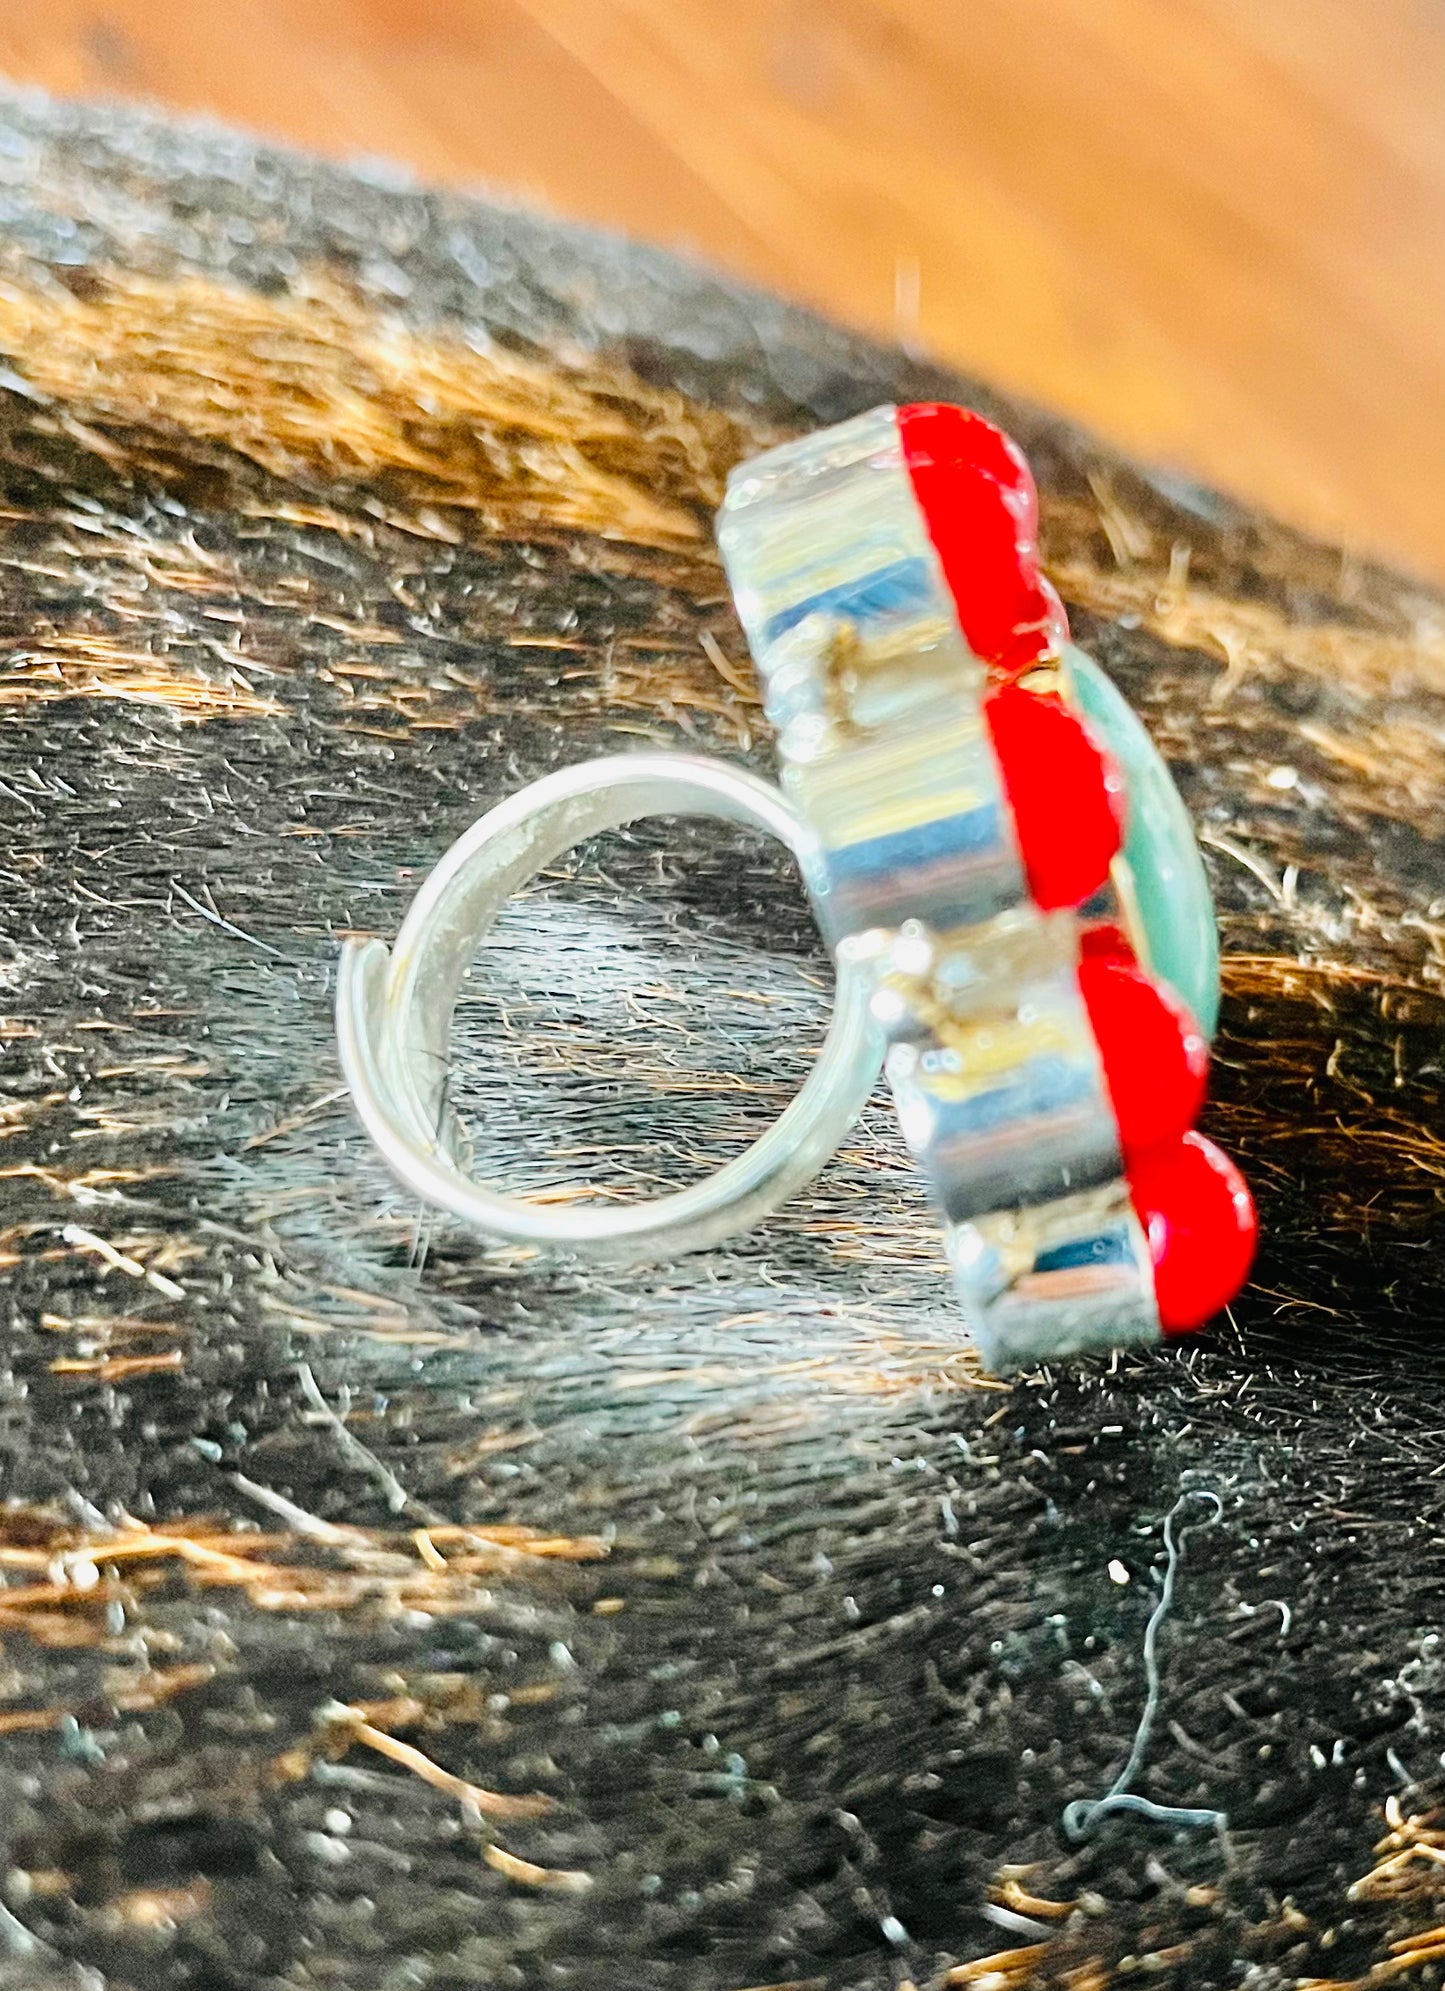 Red and turquoise adjustable ring